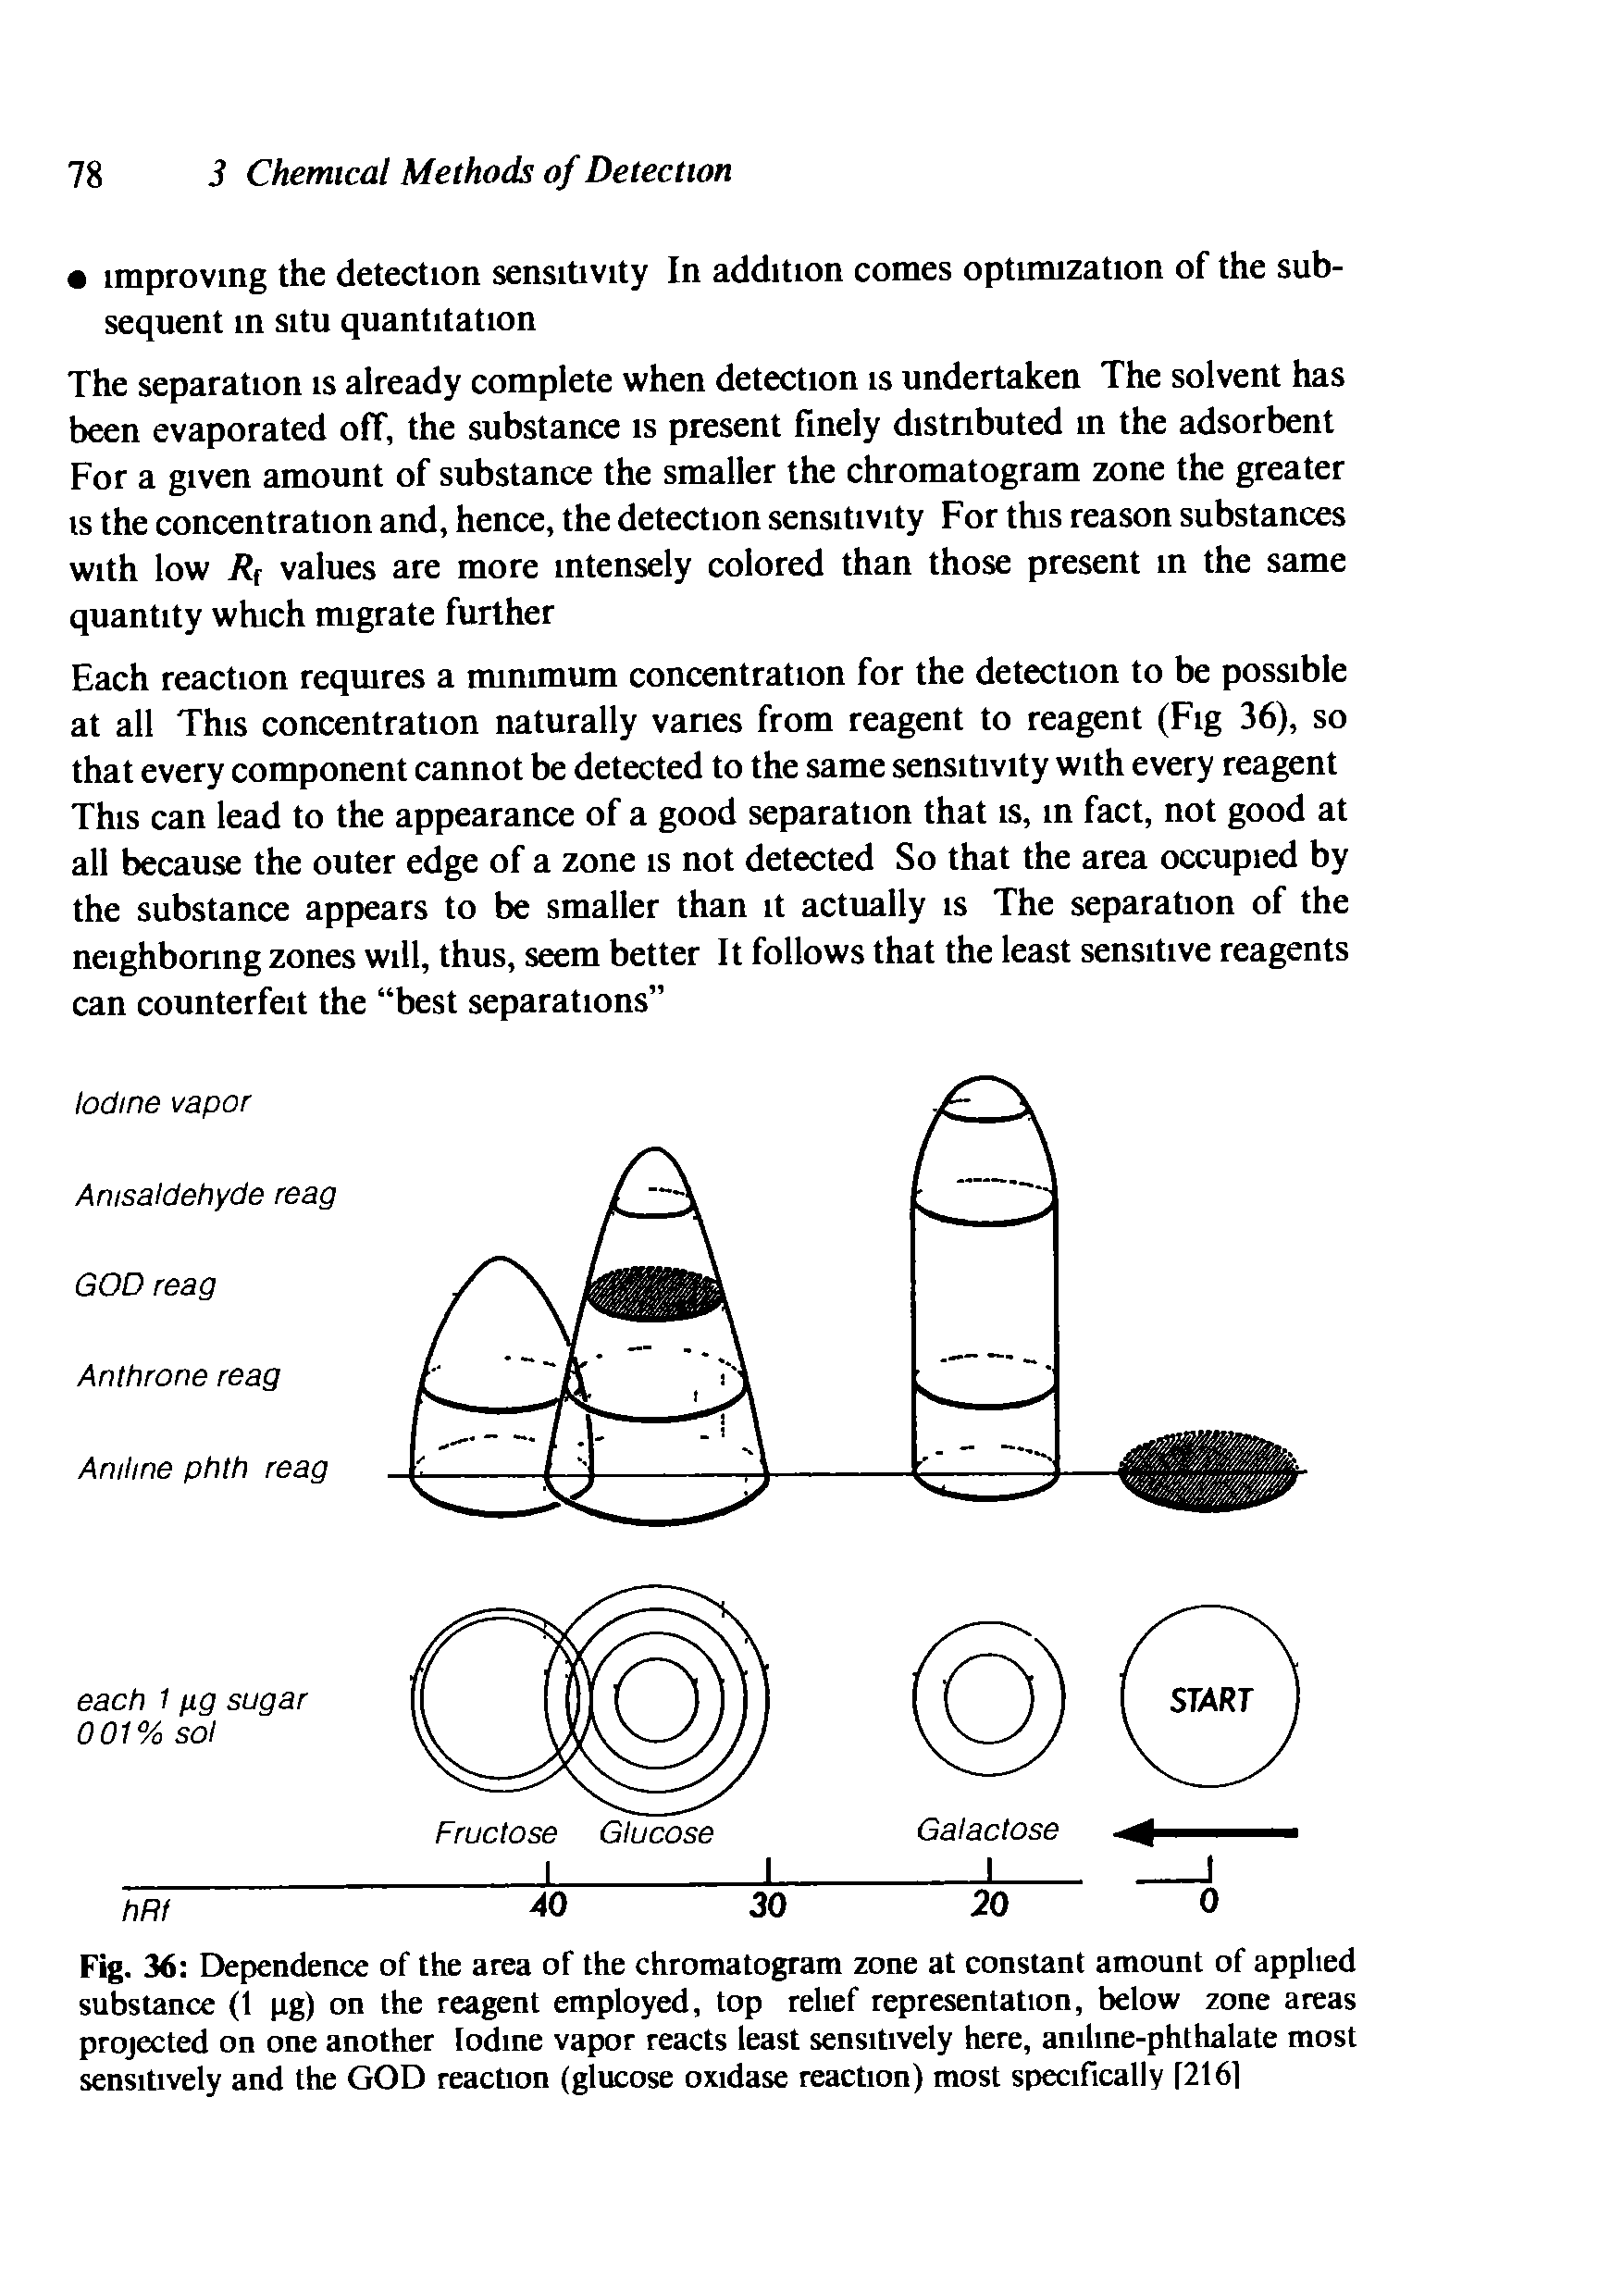 Fig. 36 Dependence of the area of the chromatogram zone at constant amount of applied substance (1 pg) on the reagent employed, top relief representation, below zone areas projected on one another Iodine vapor reacts least sensitively here, aniline-phthalate most sensitively and the GOD reaction (glucose oxidase reaction) most specifically [2161...